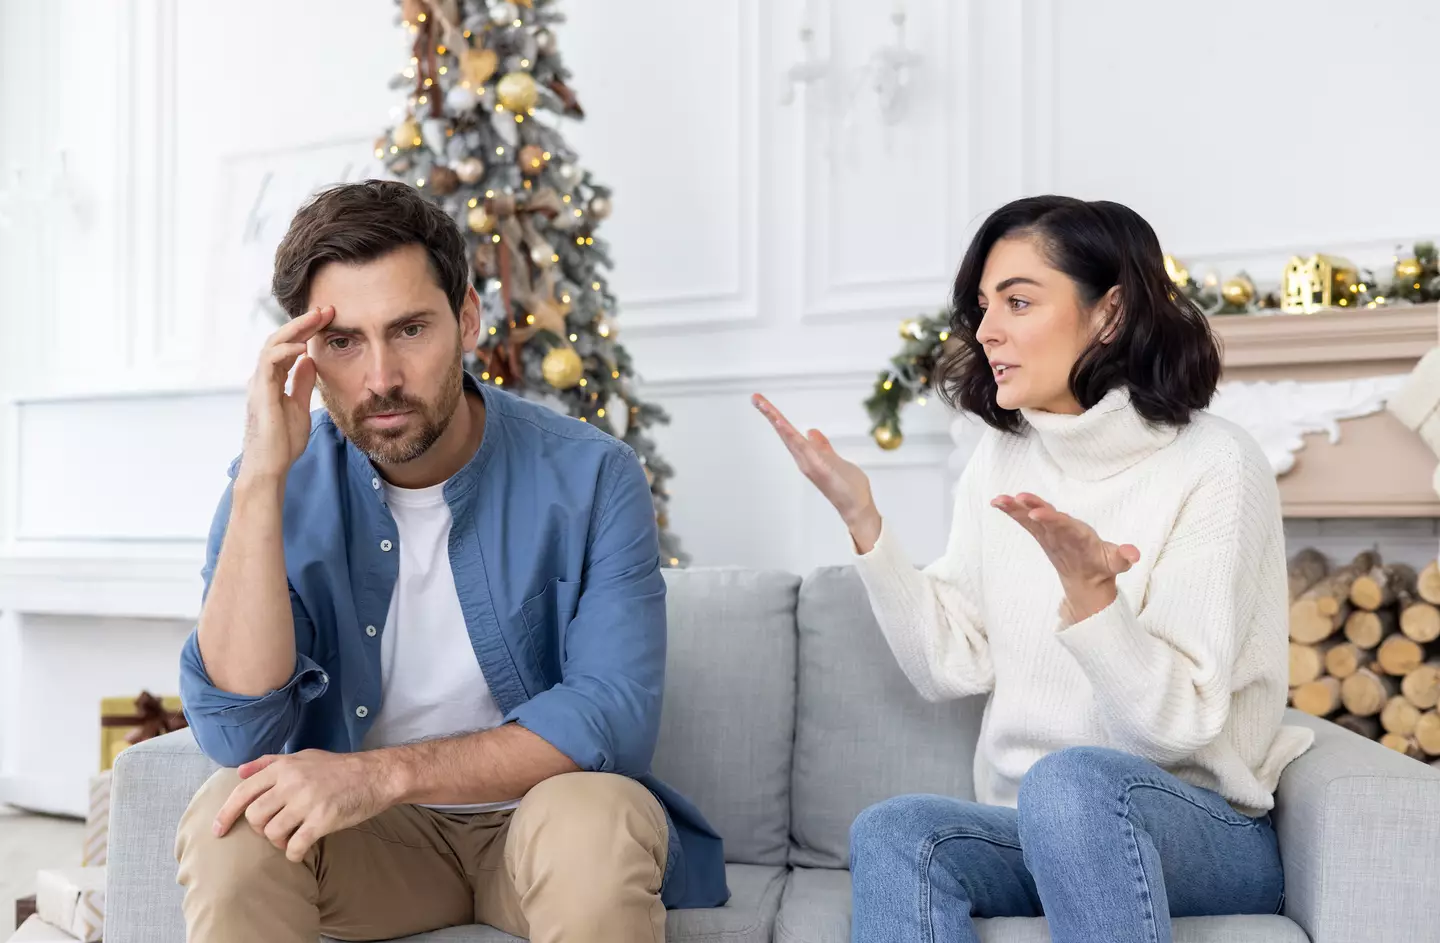 Christmas can be a time of conflict for some couples.